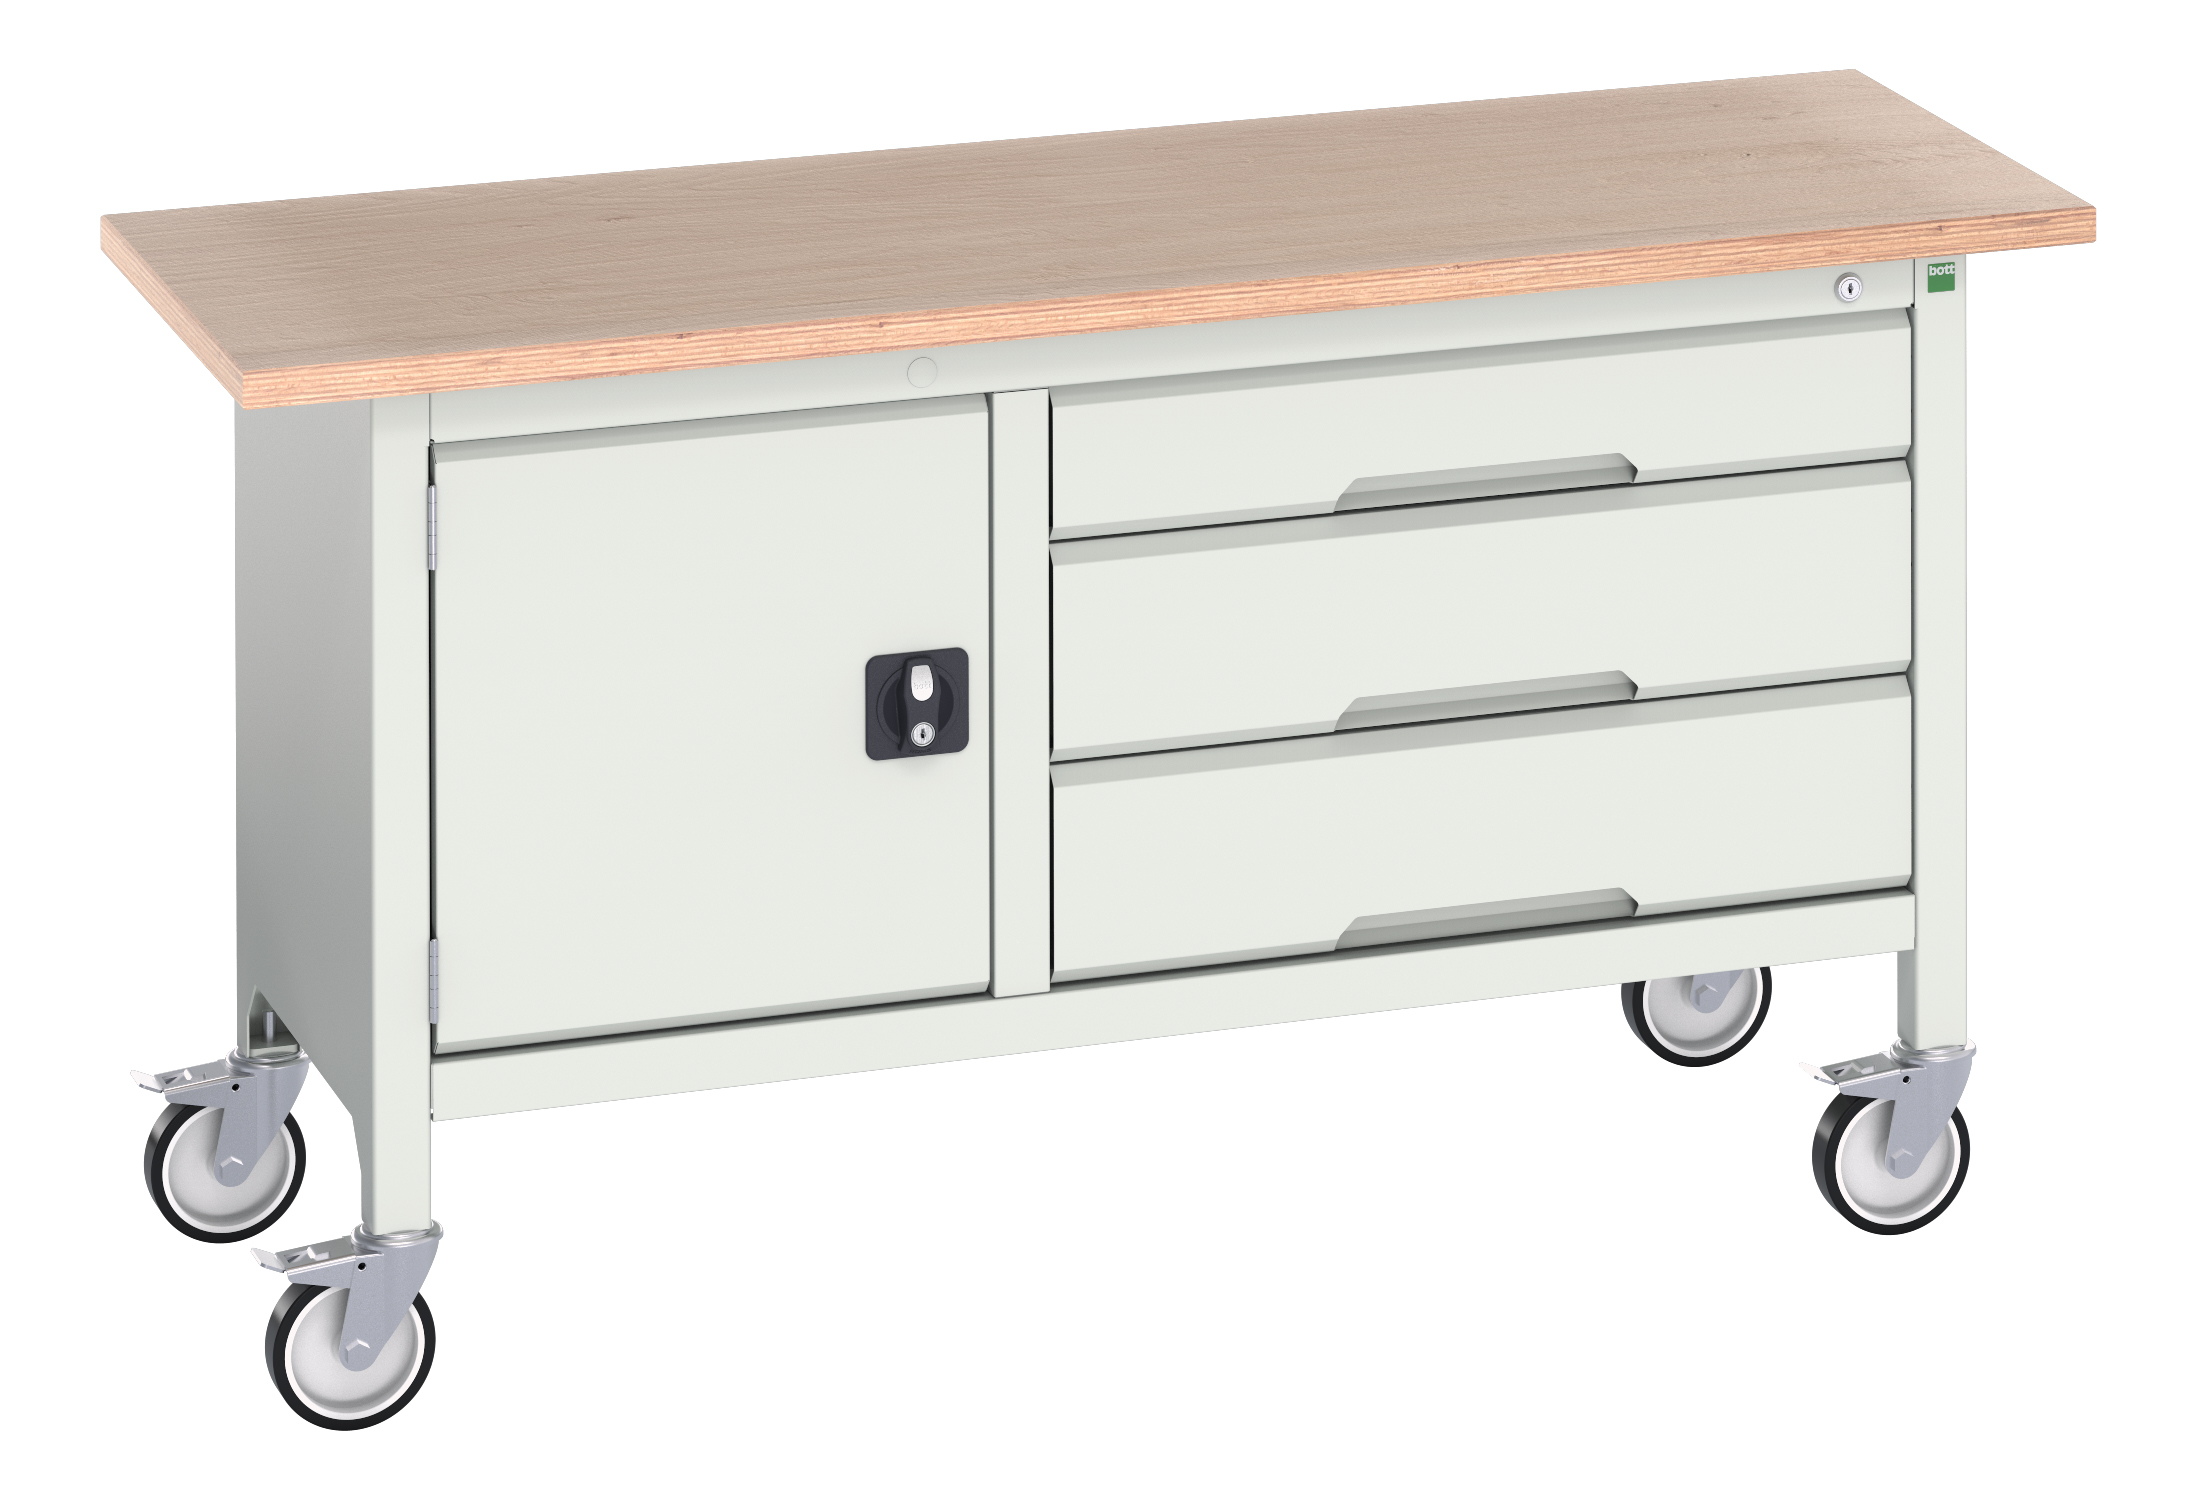 Bott Verso Mobile Storage Bench With Full Cupboard / 3 Drawer Cab - 16923214.16